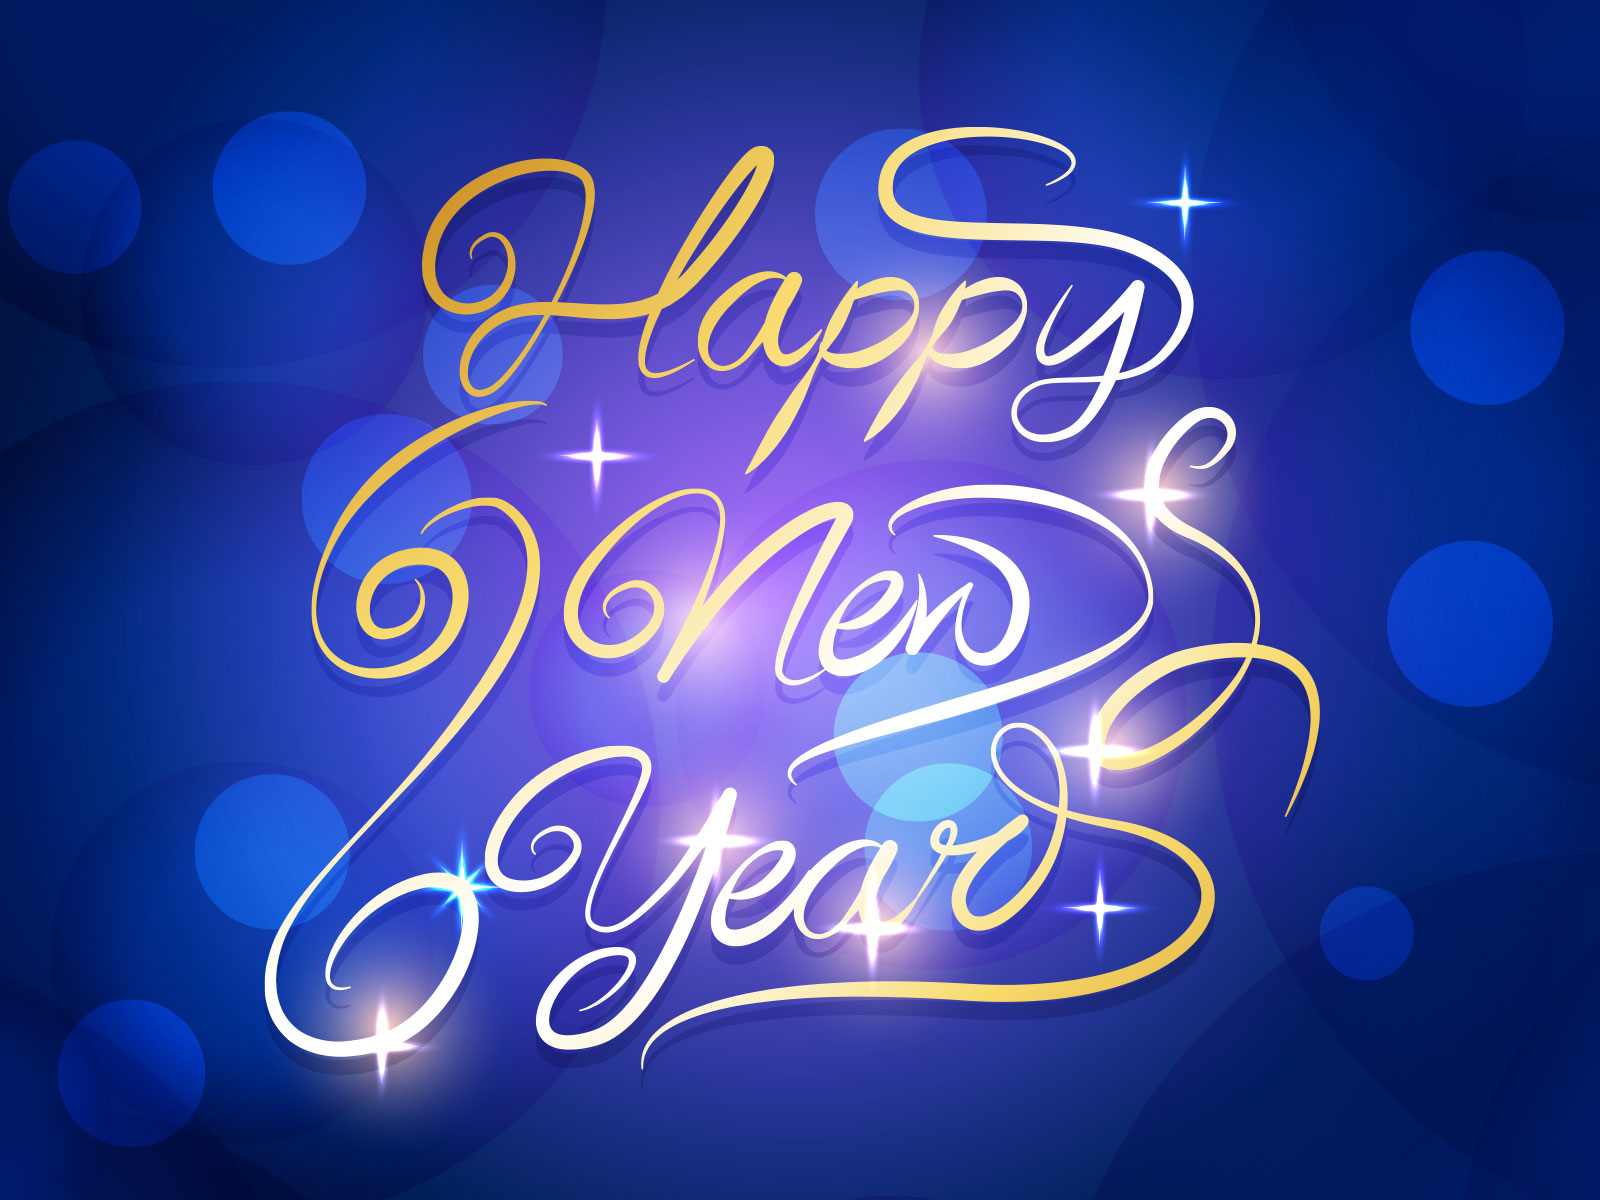 Happy New Year 2015 Wallpapers Images amp Facebook Cover photos 1600x1200